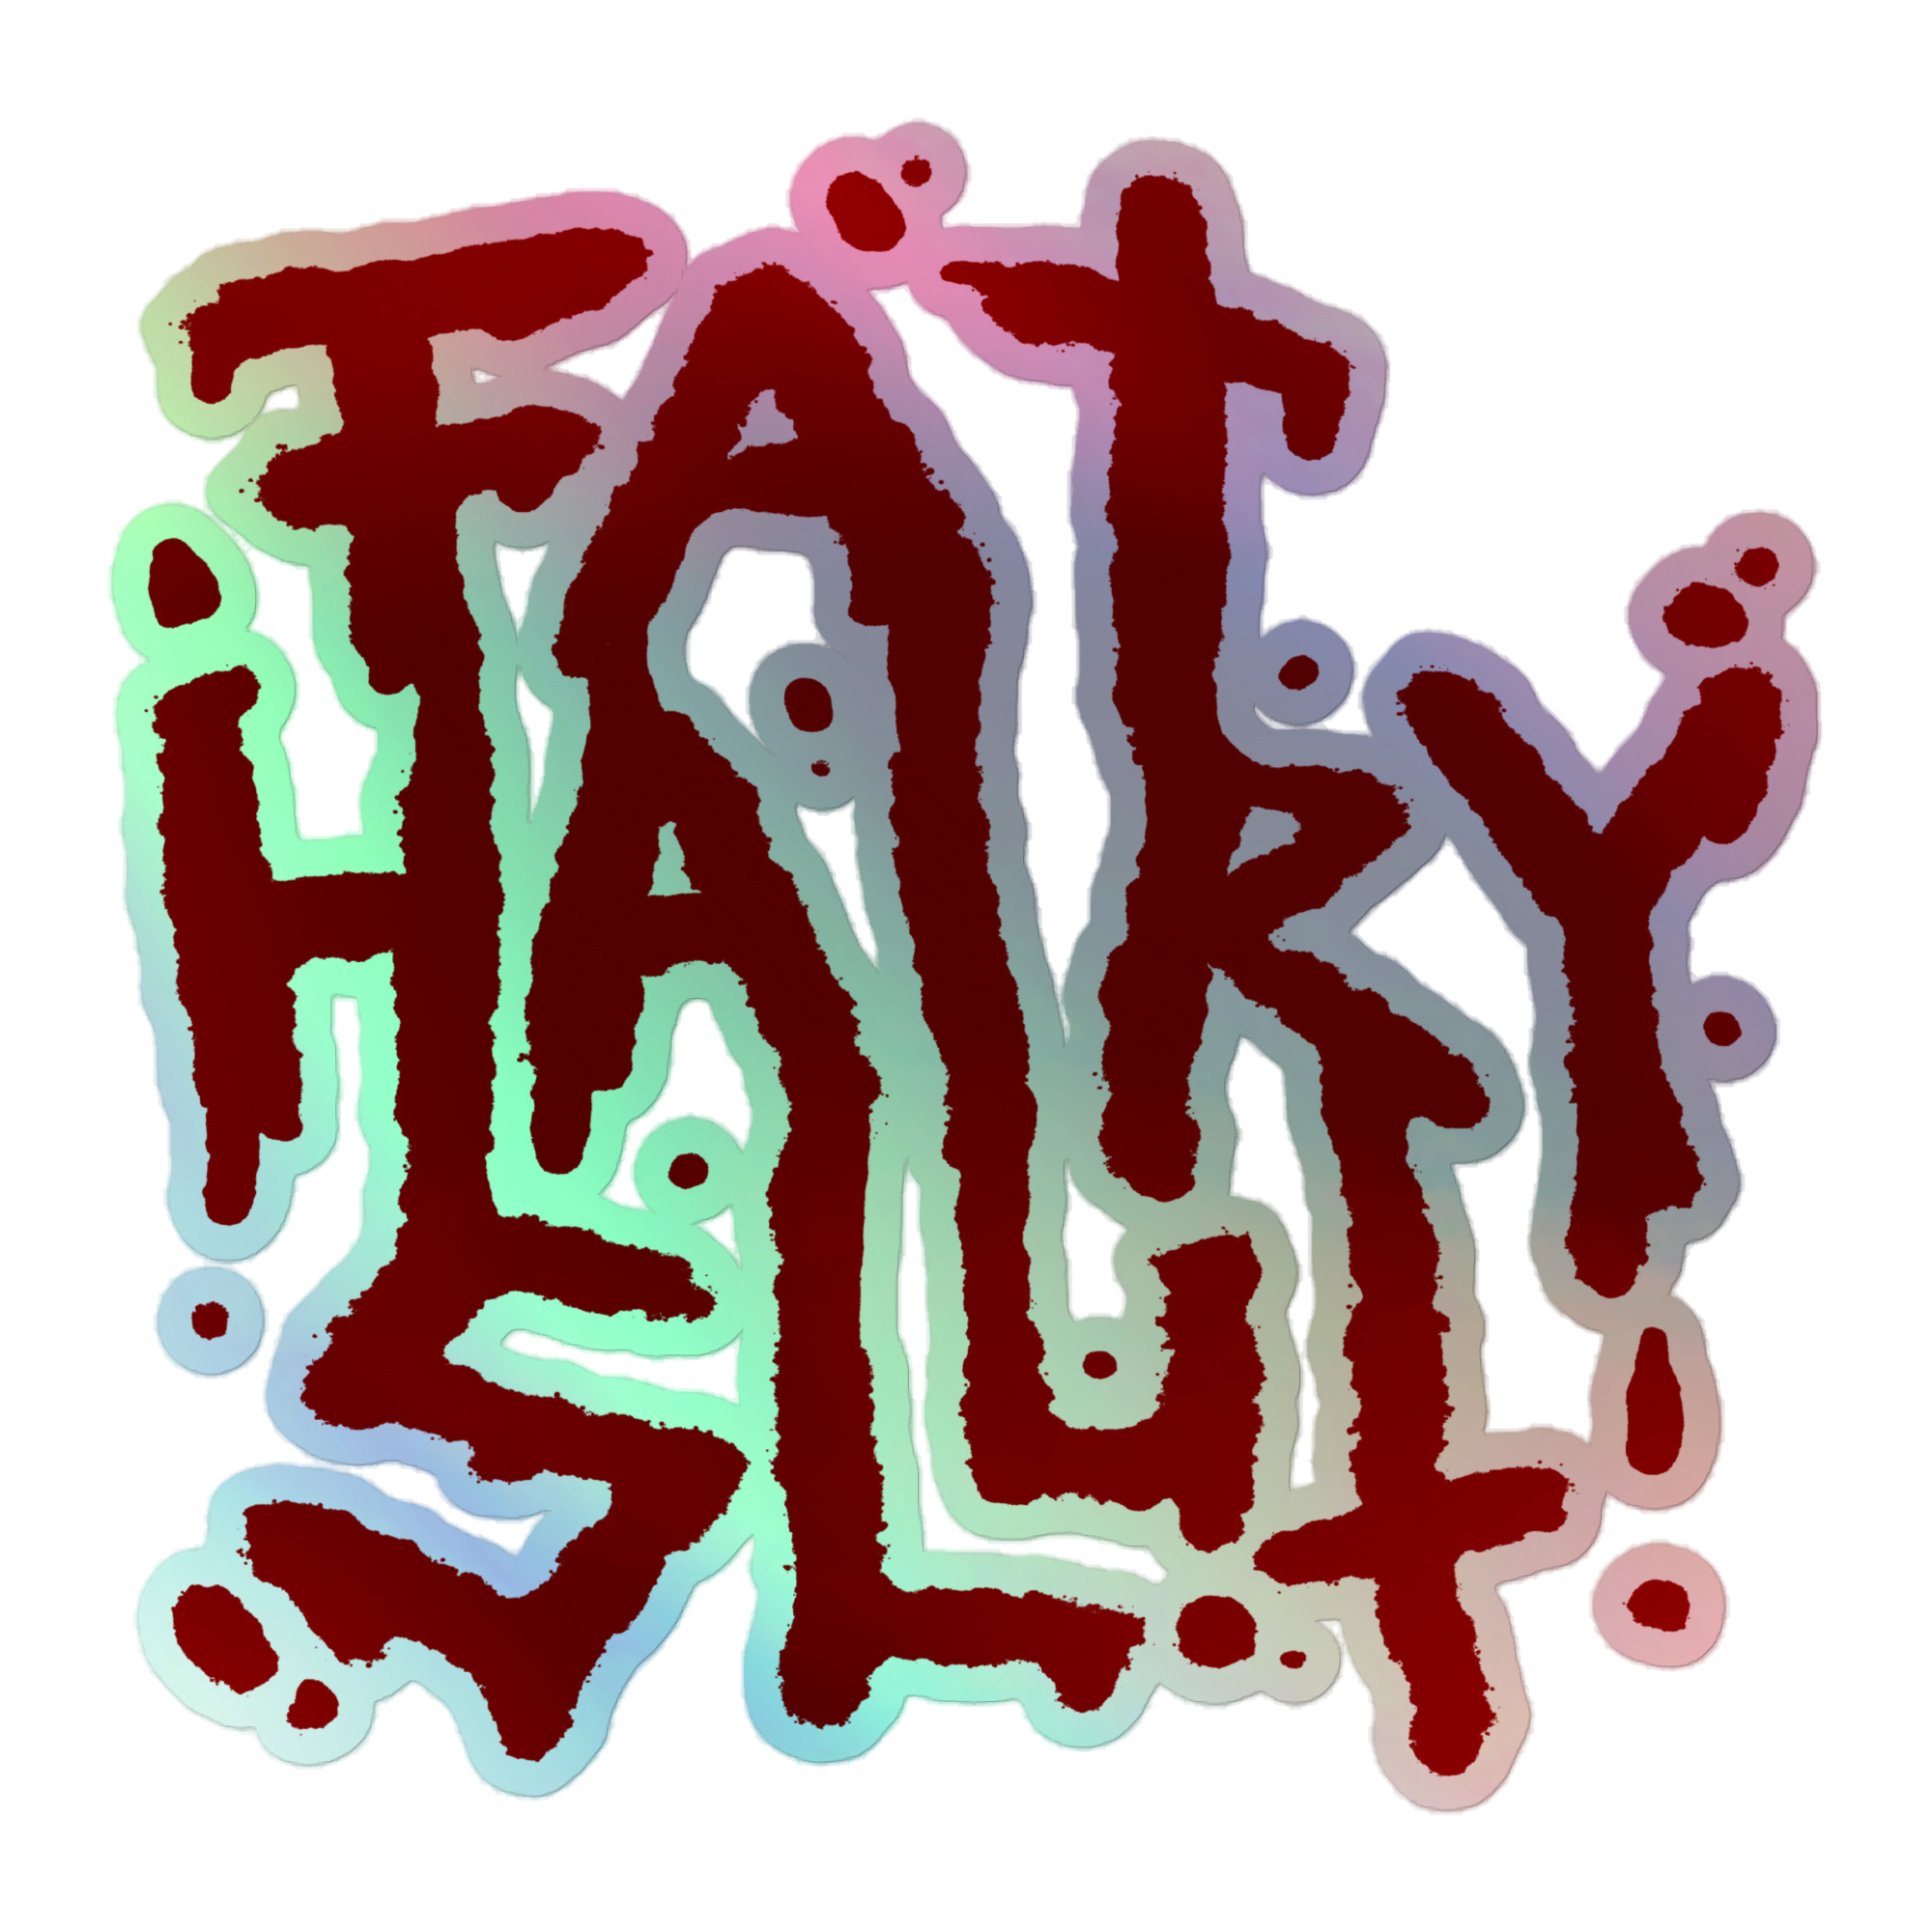 Featured image for “Fat Hairy Slut - Holographic stickers”